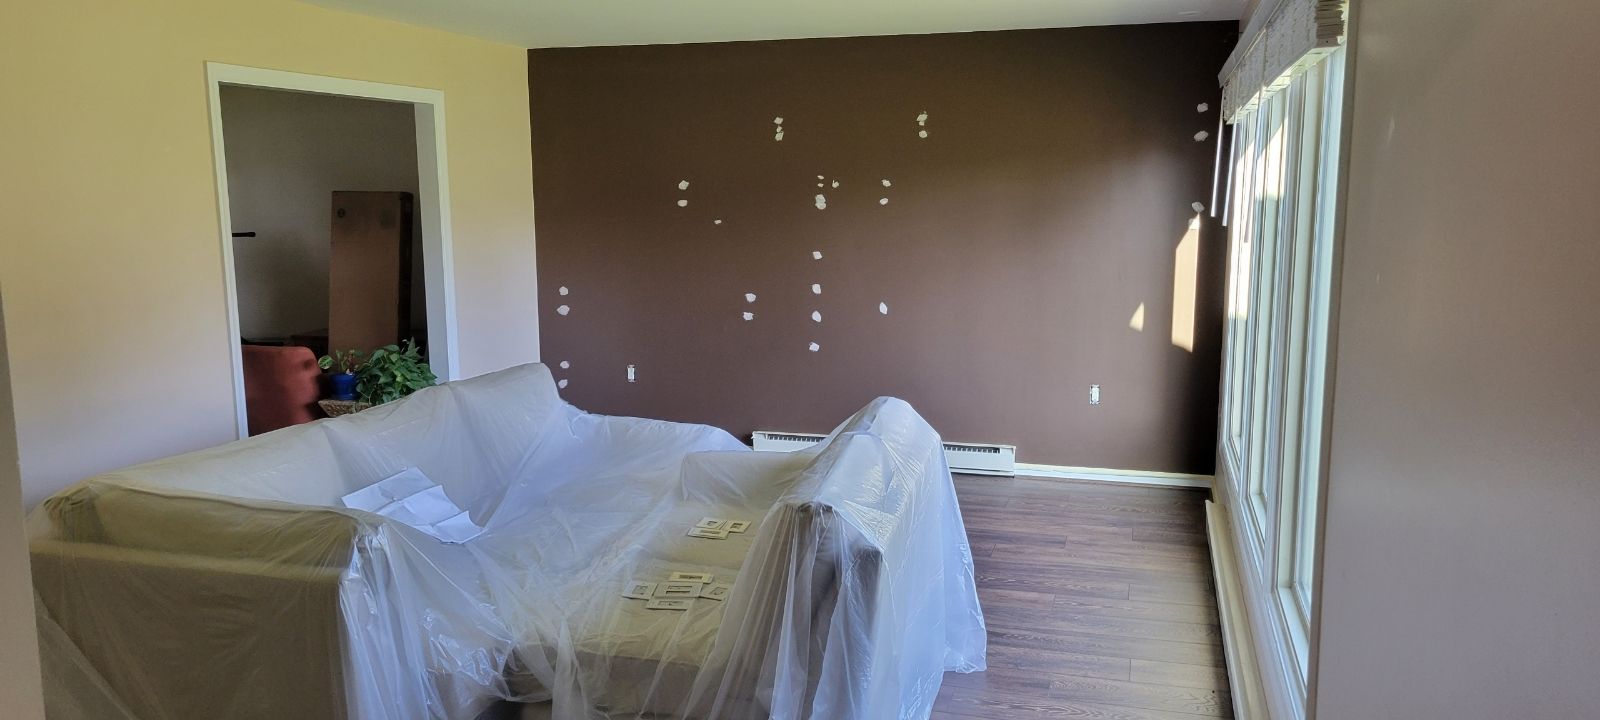 A living room with a couch covered in plastic and a brown wall work done by EK Painting in central PA